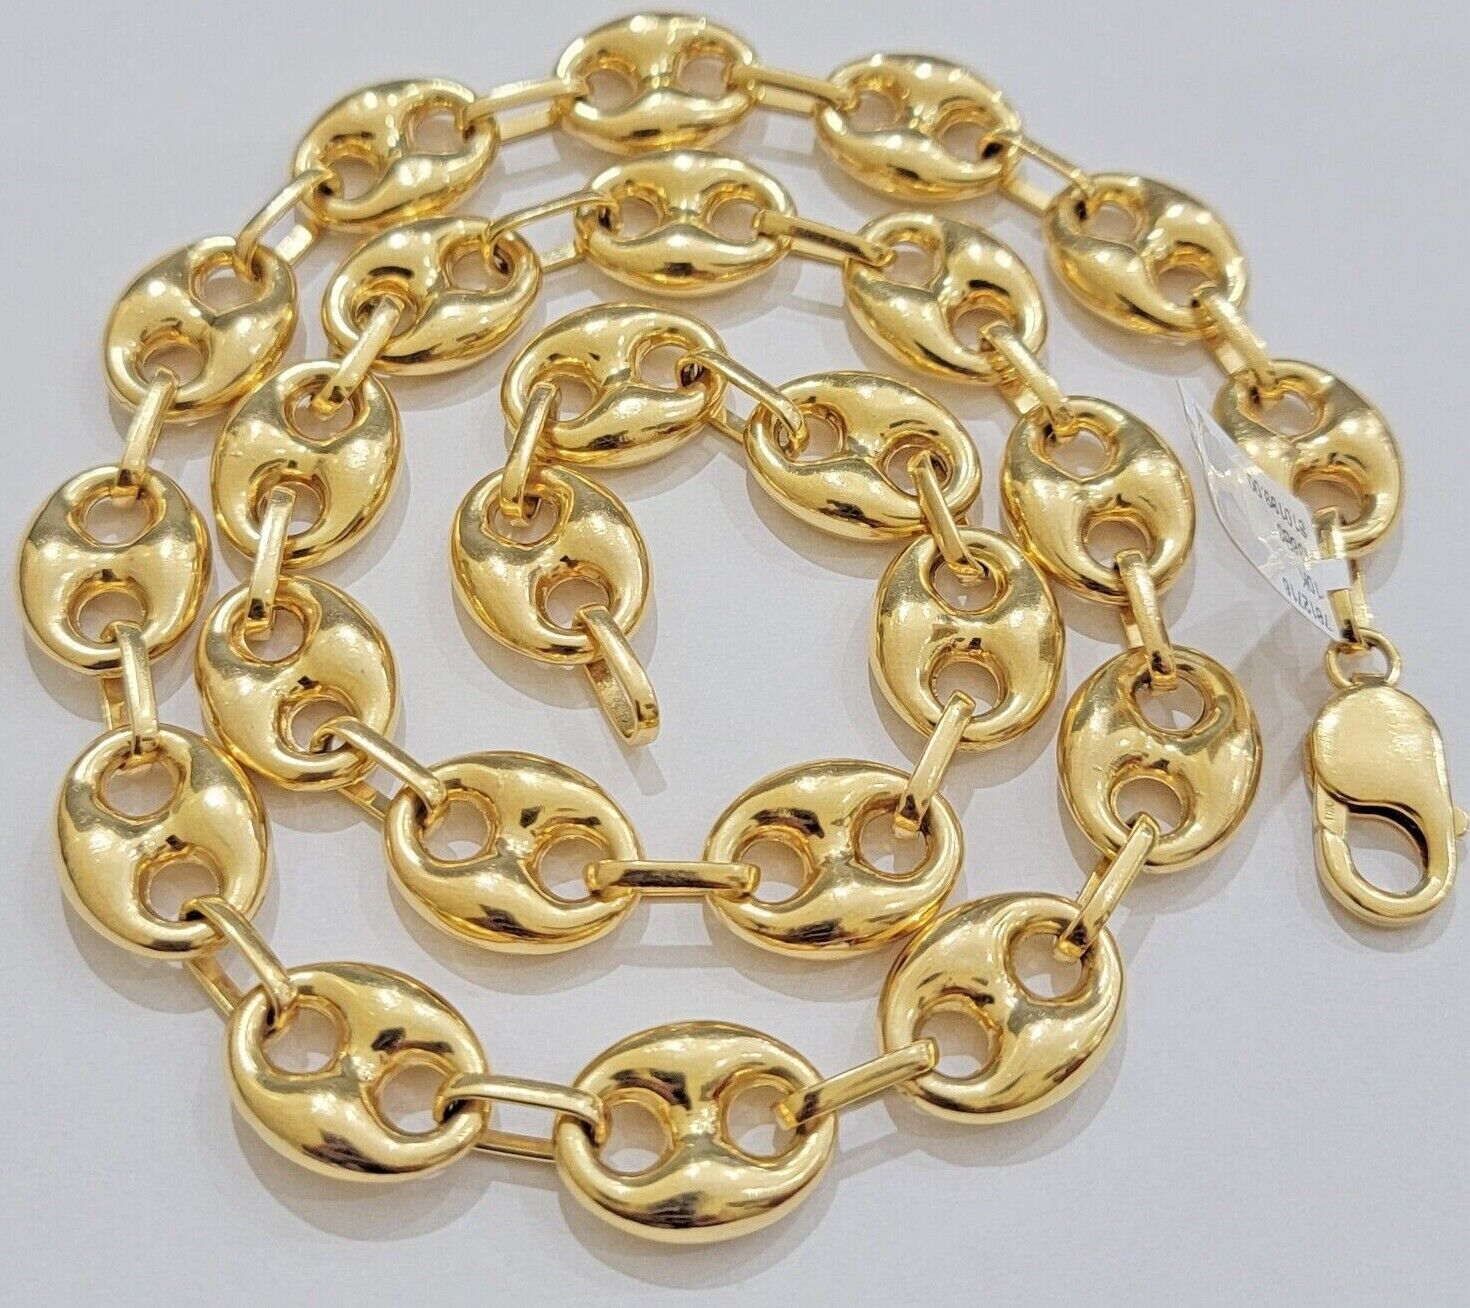 Real 10k Gold Puffed Mariner Anchor Link Chain Necklace 24" 14 mm 10KT Yellow Gd